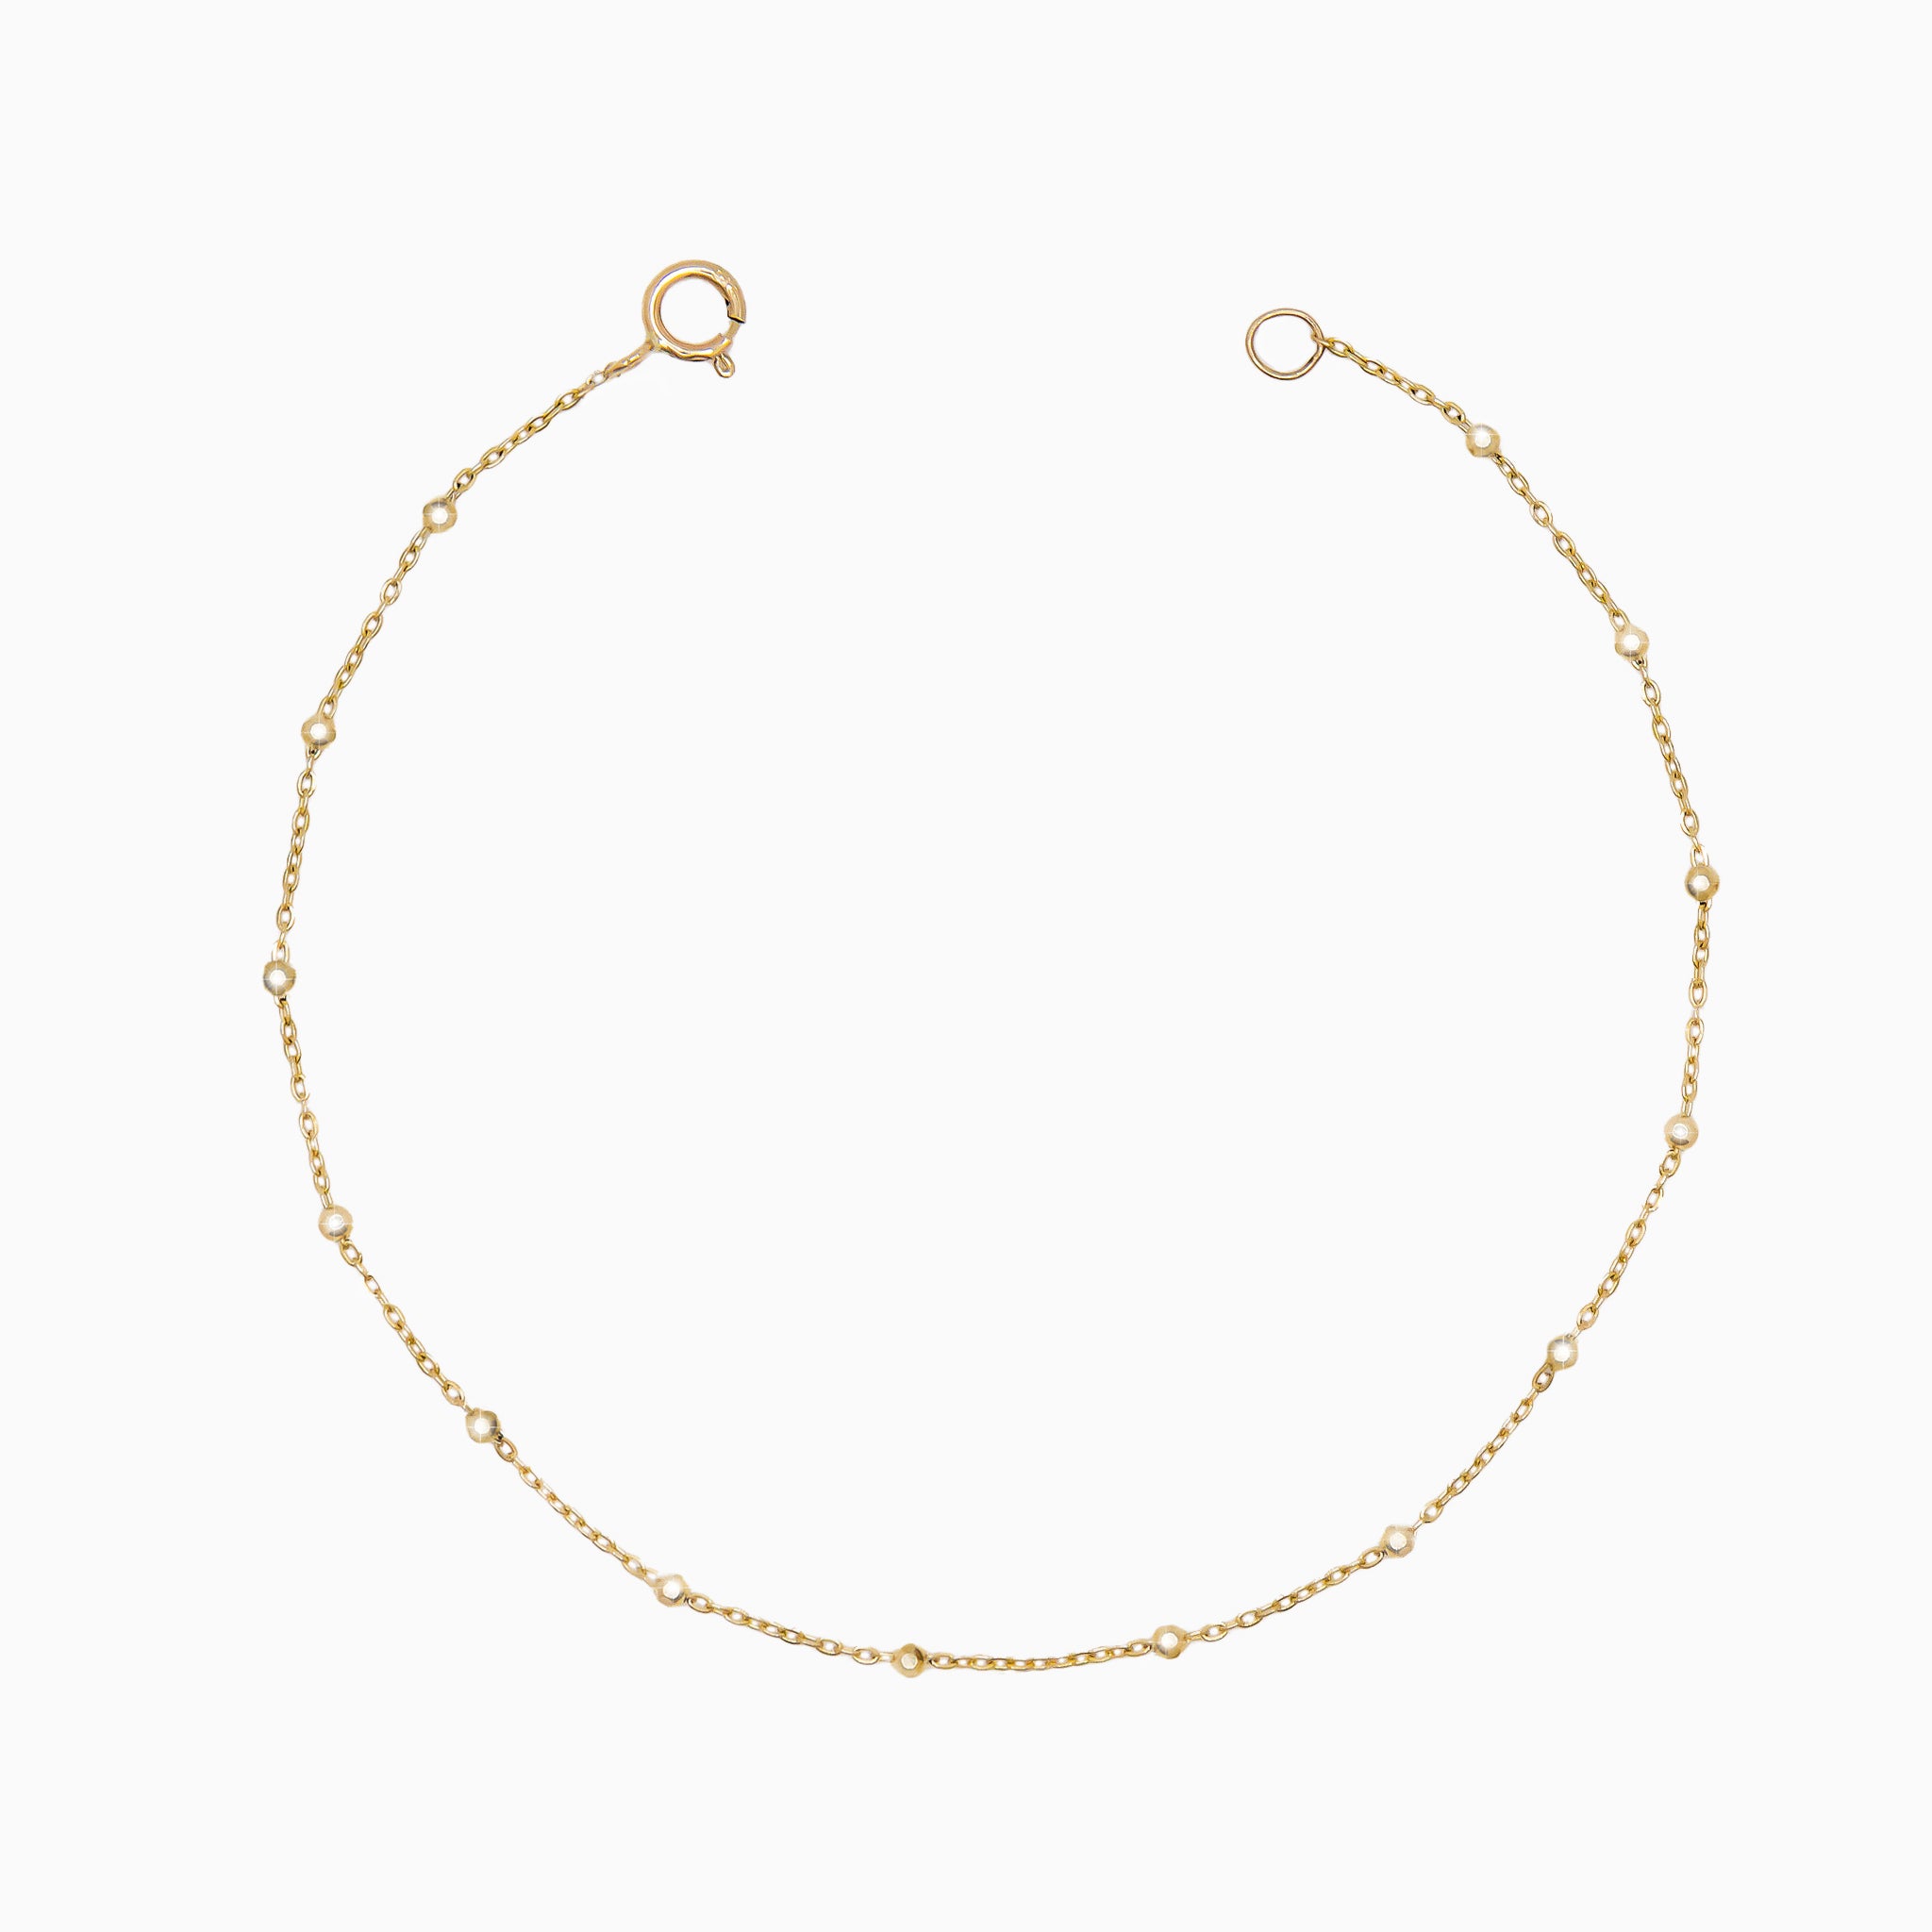 14k Yellow Gold "I Love the Nightlife" Diamond-Cut Disco Ball Cable Chain Bracelet